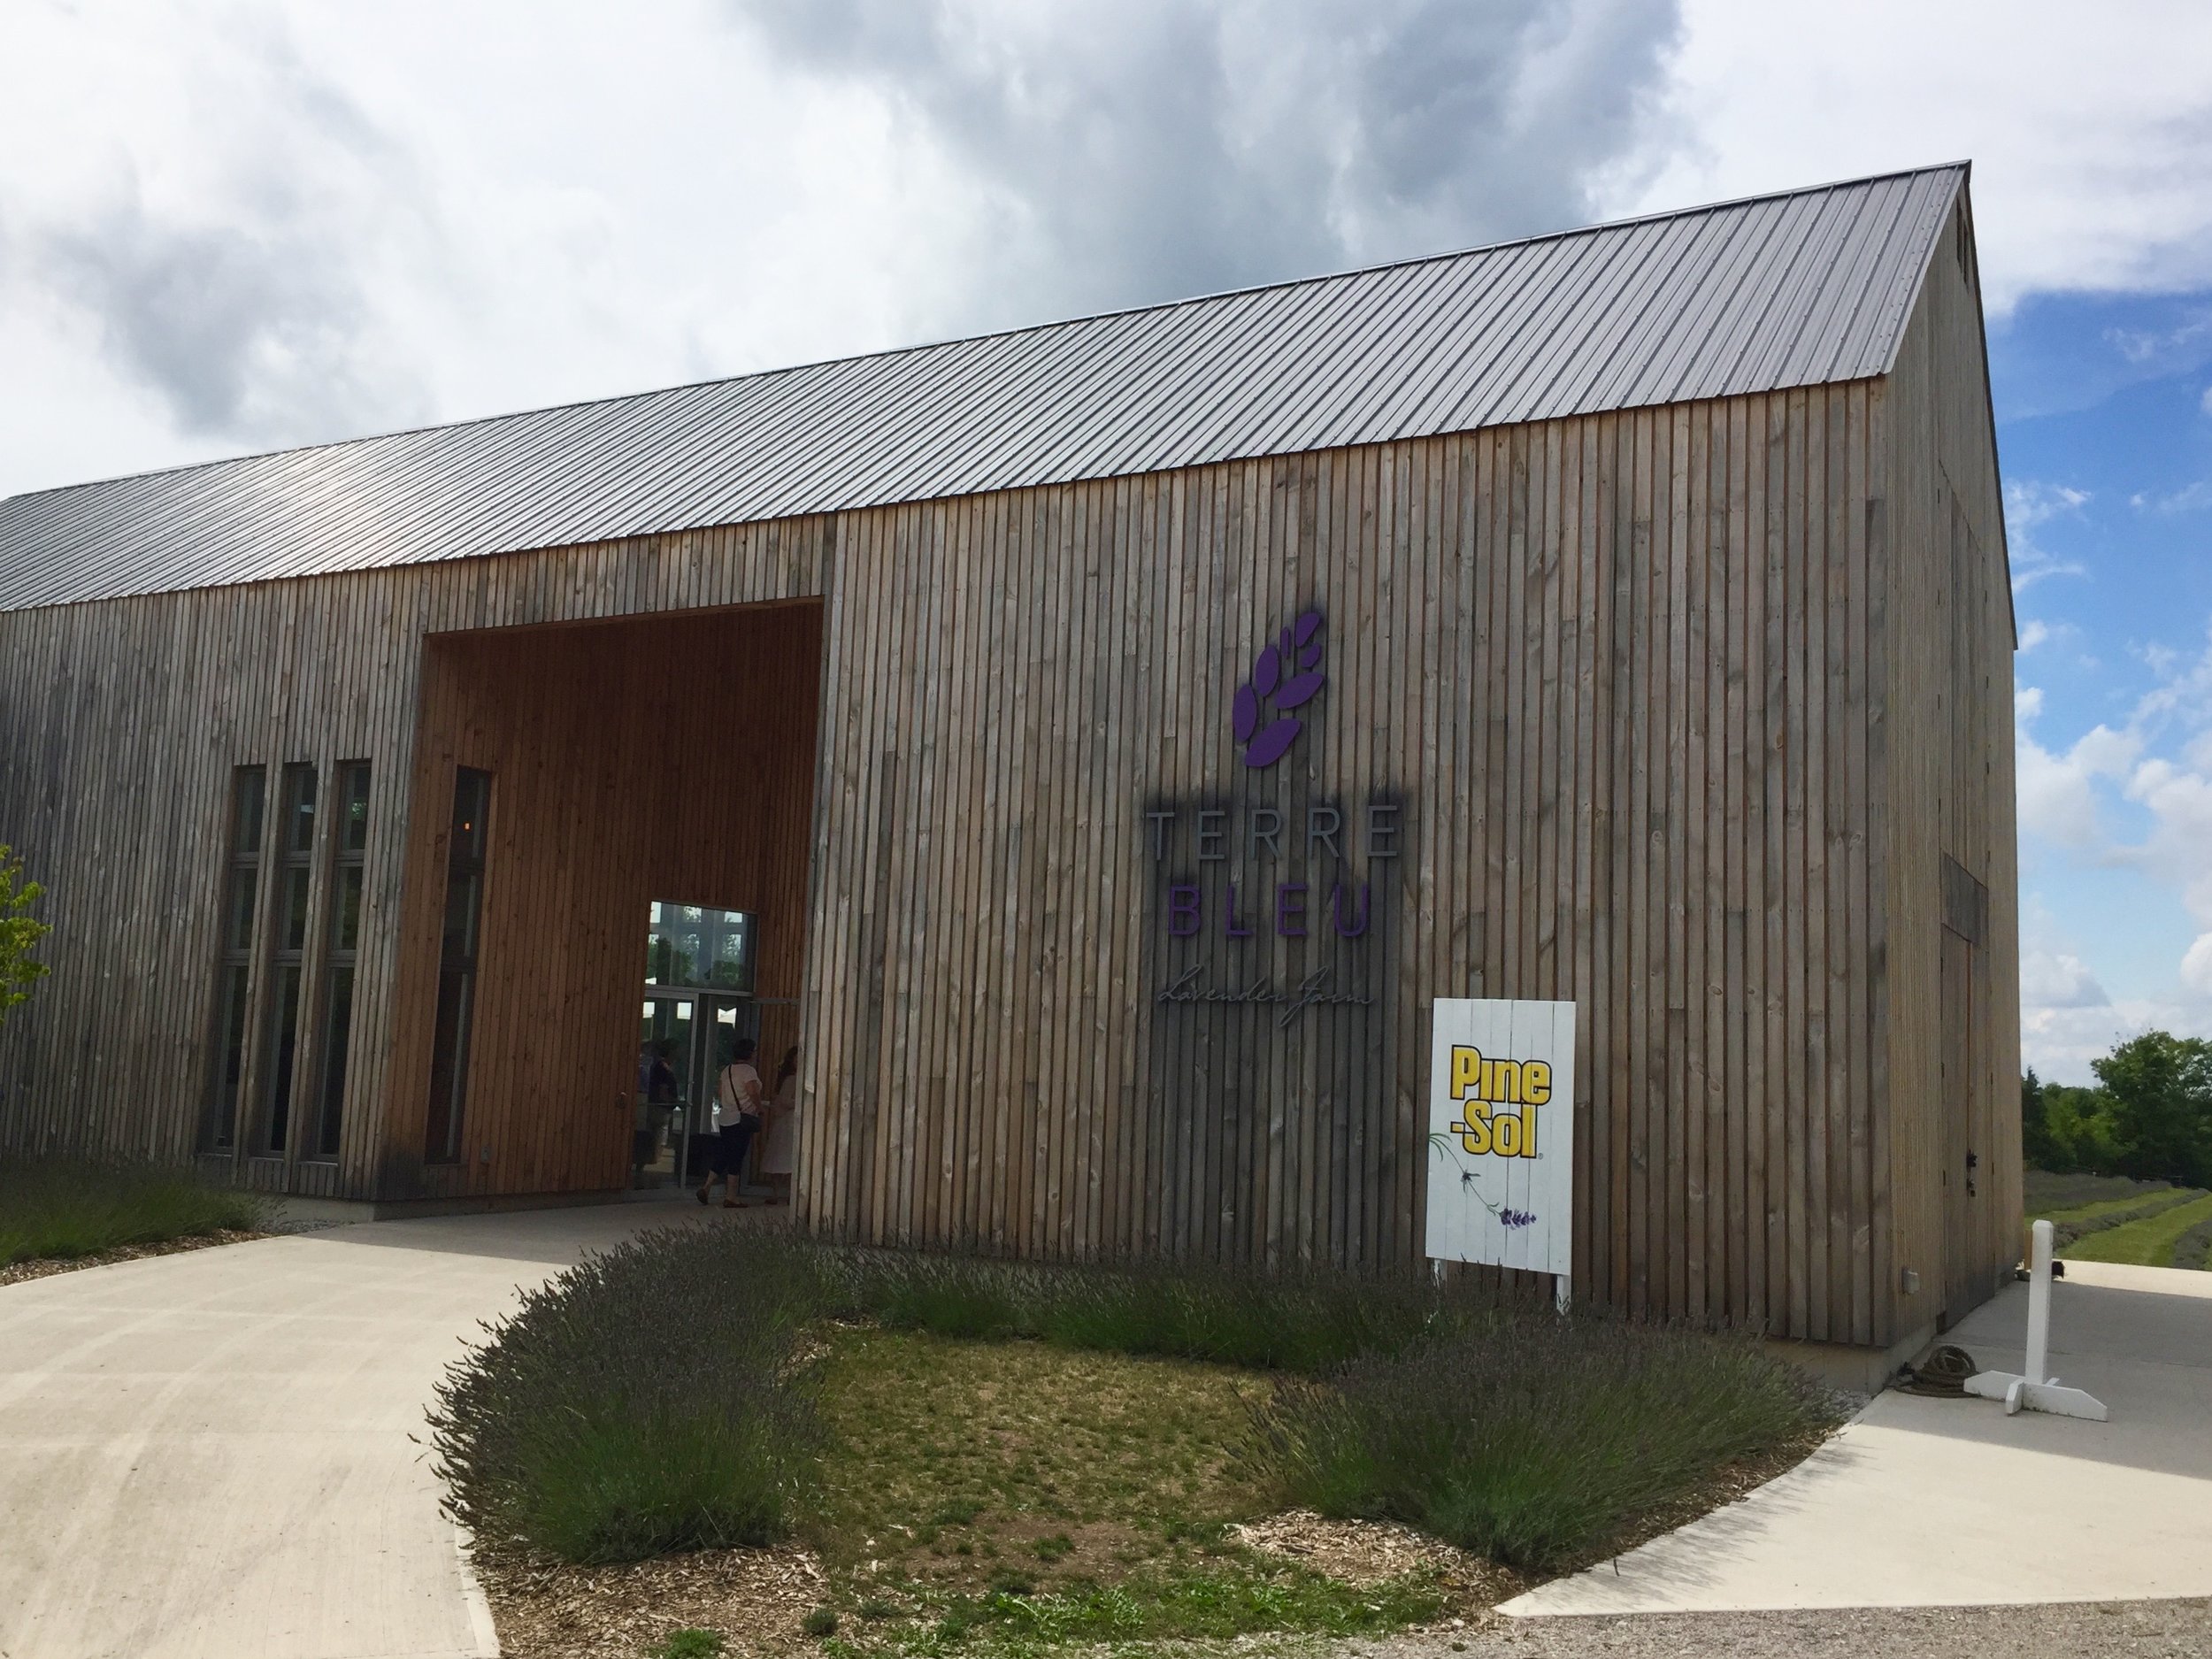  The main building houses a lovely shop and is a fantastic modern barn design. 